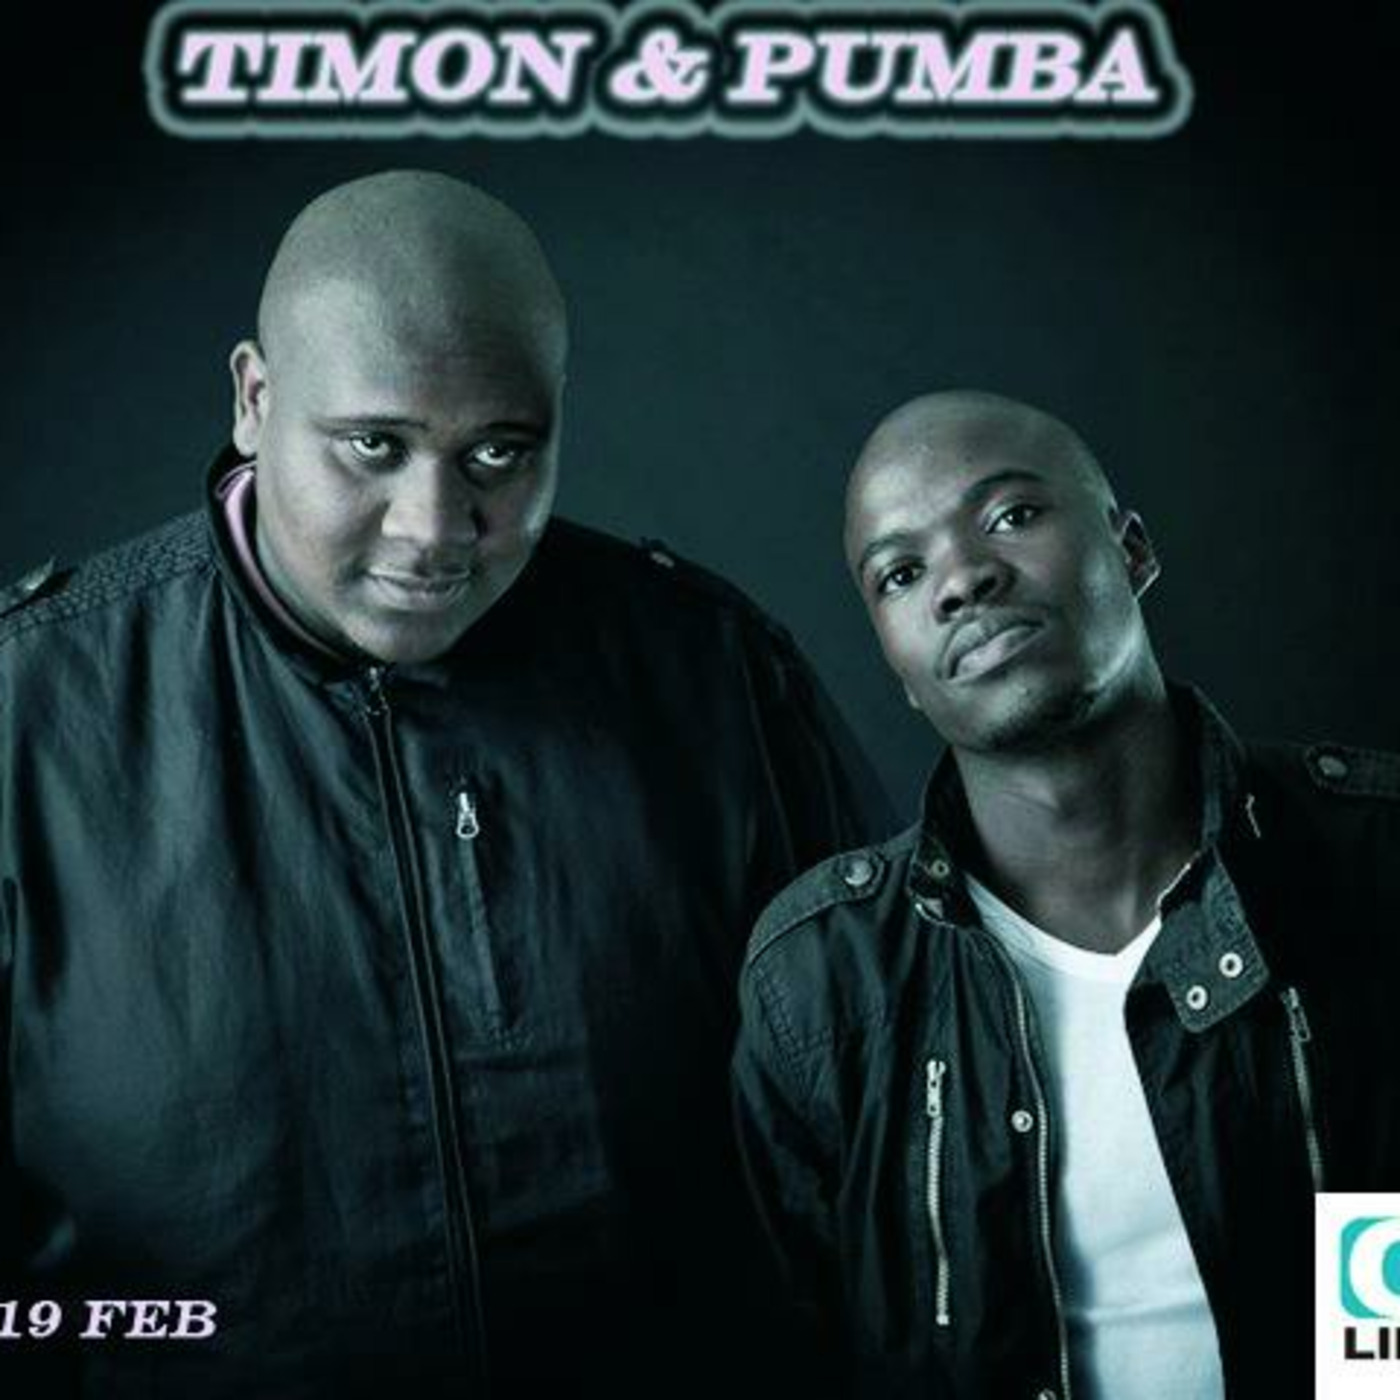 Timon and Pumba (South Africa) on MUSIC AND WINE Radio - Episode 43